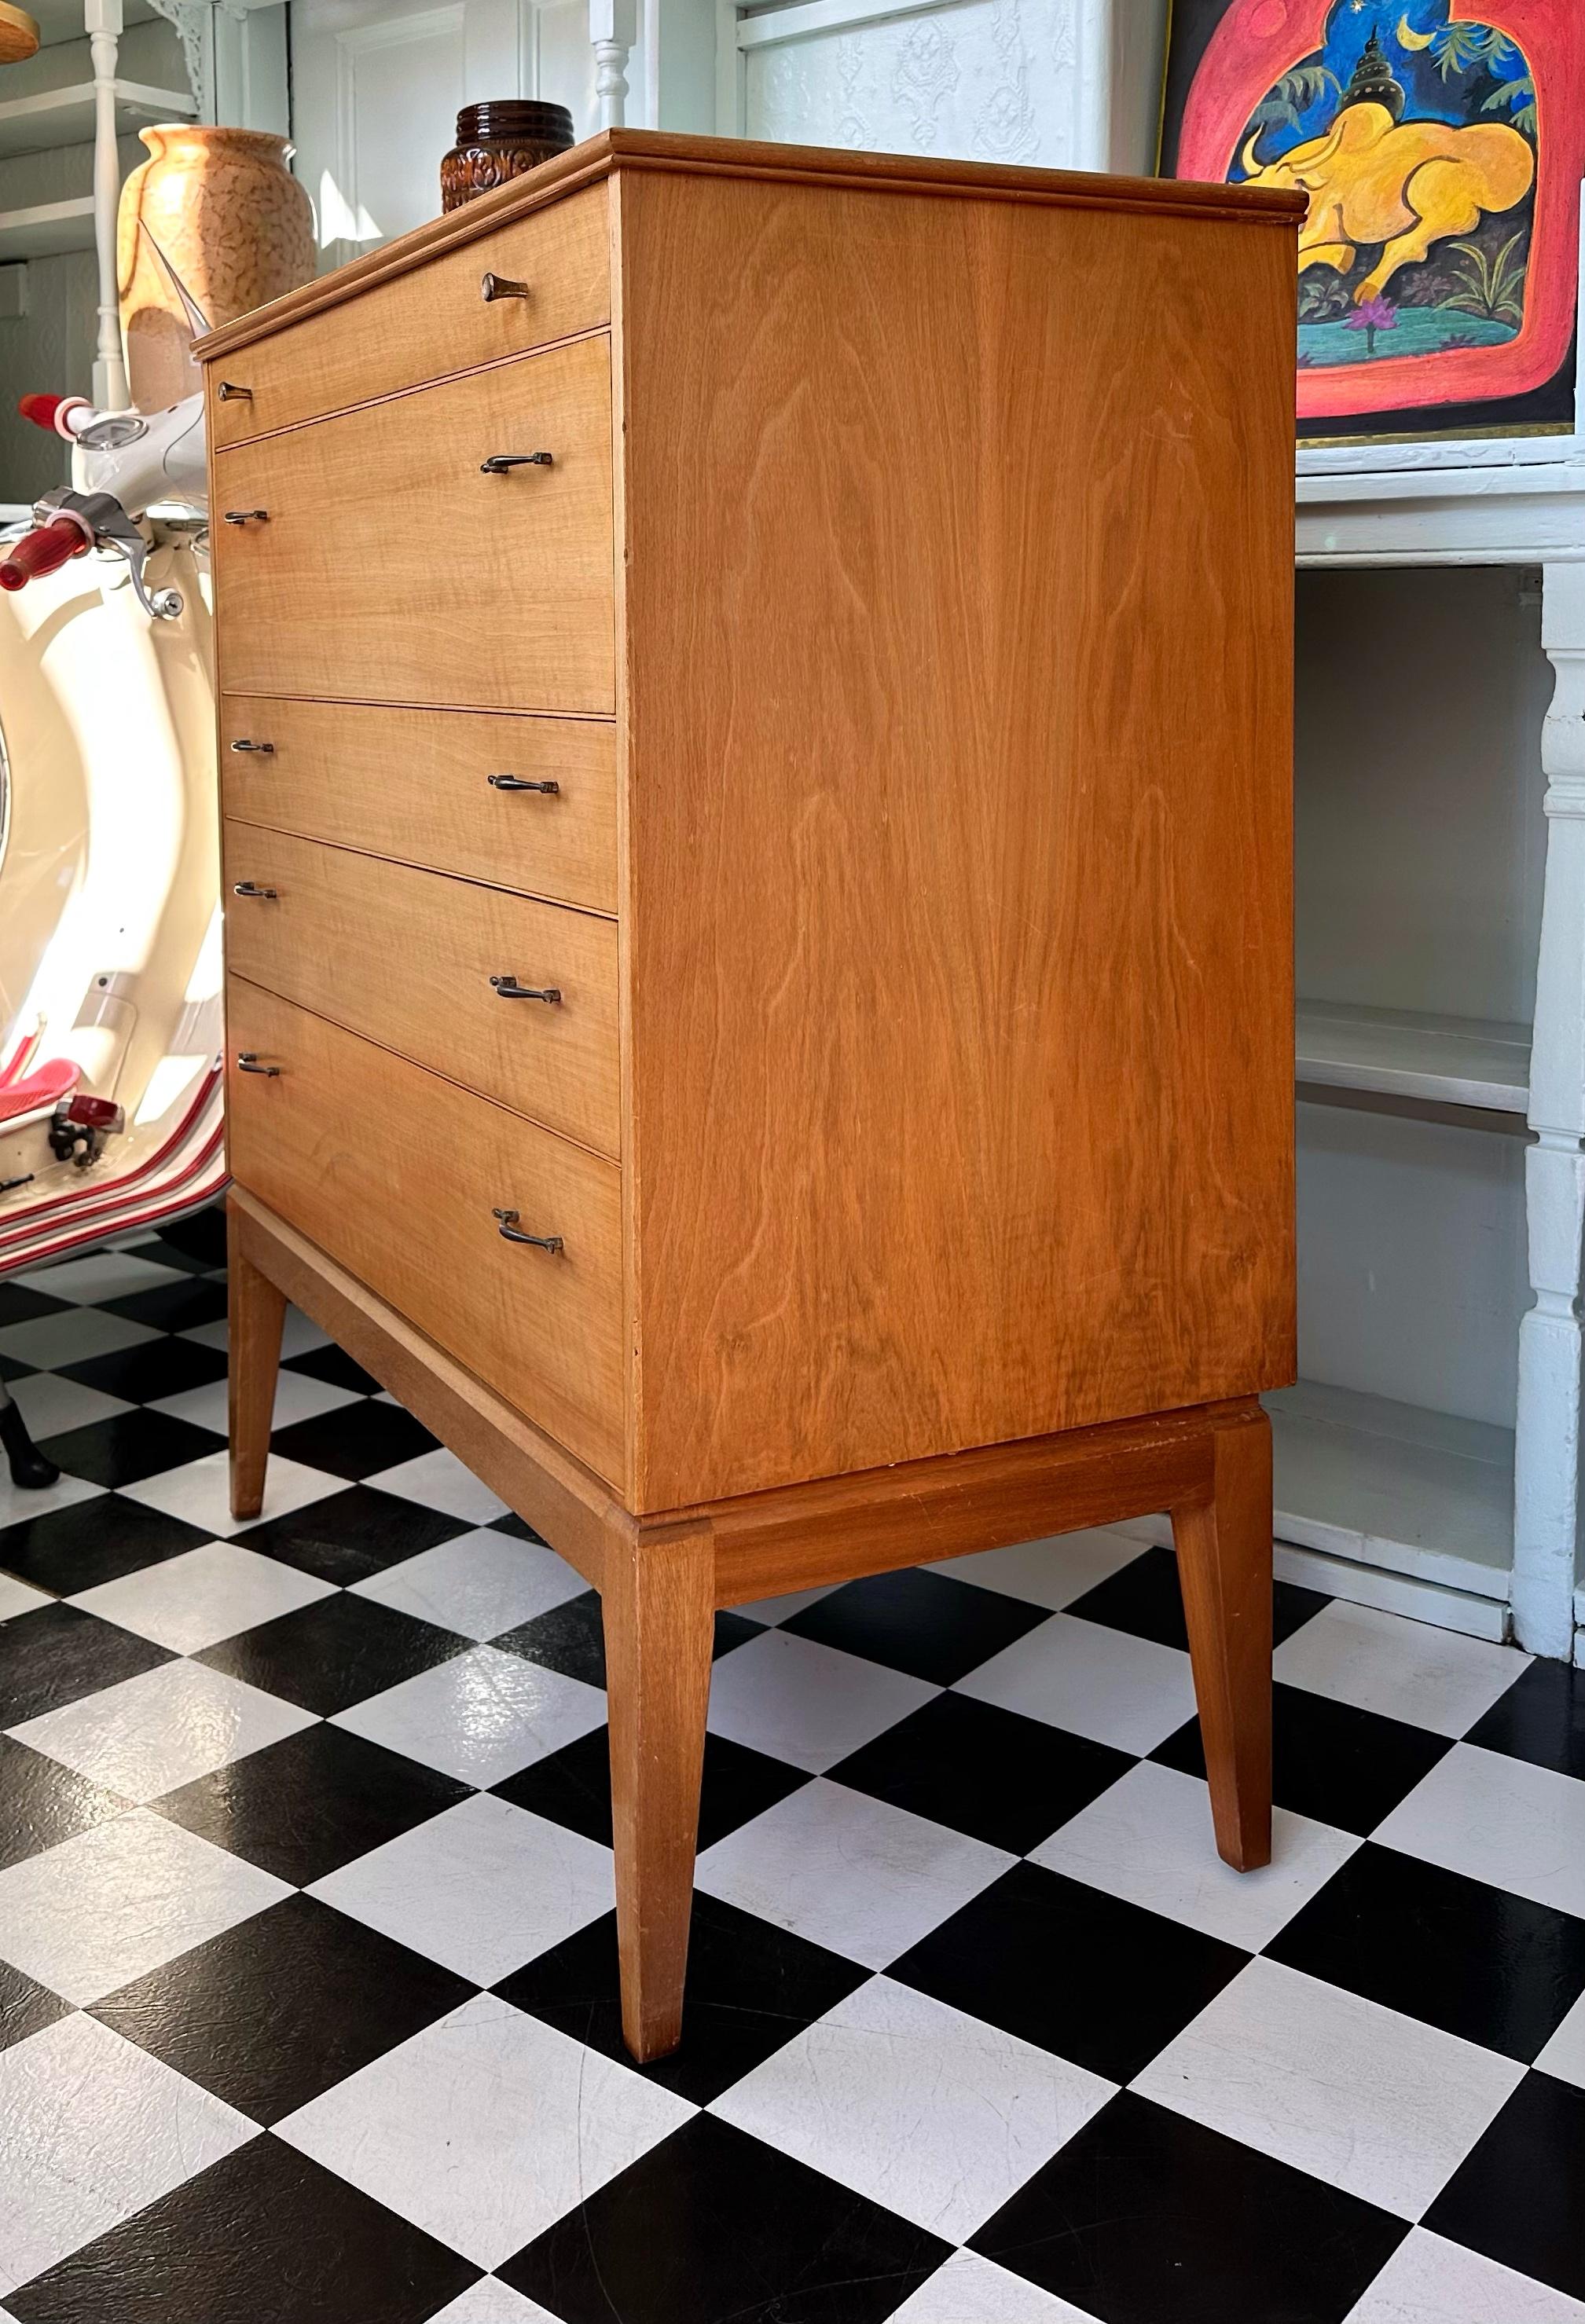 We’re happy to provide our own competitive shipping quotes with trusted couriers. Please message us with your postcode for a more accurate price. Thank you.

Very rare Mid Century modern teak and walnut tall chest of drawers. Designed in 1960s by